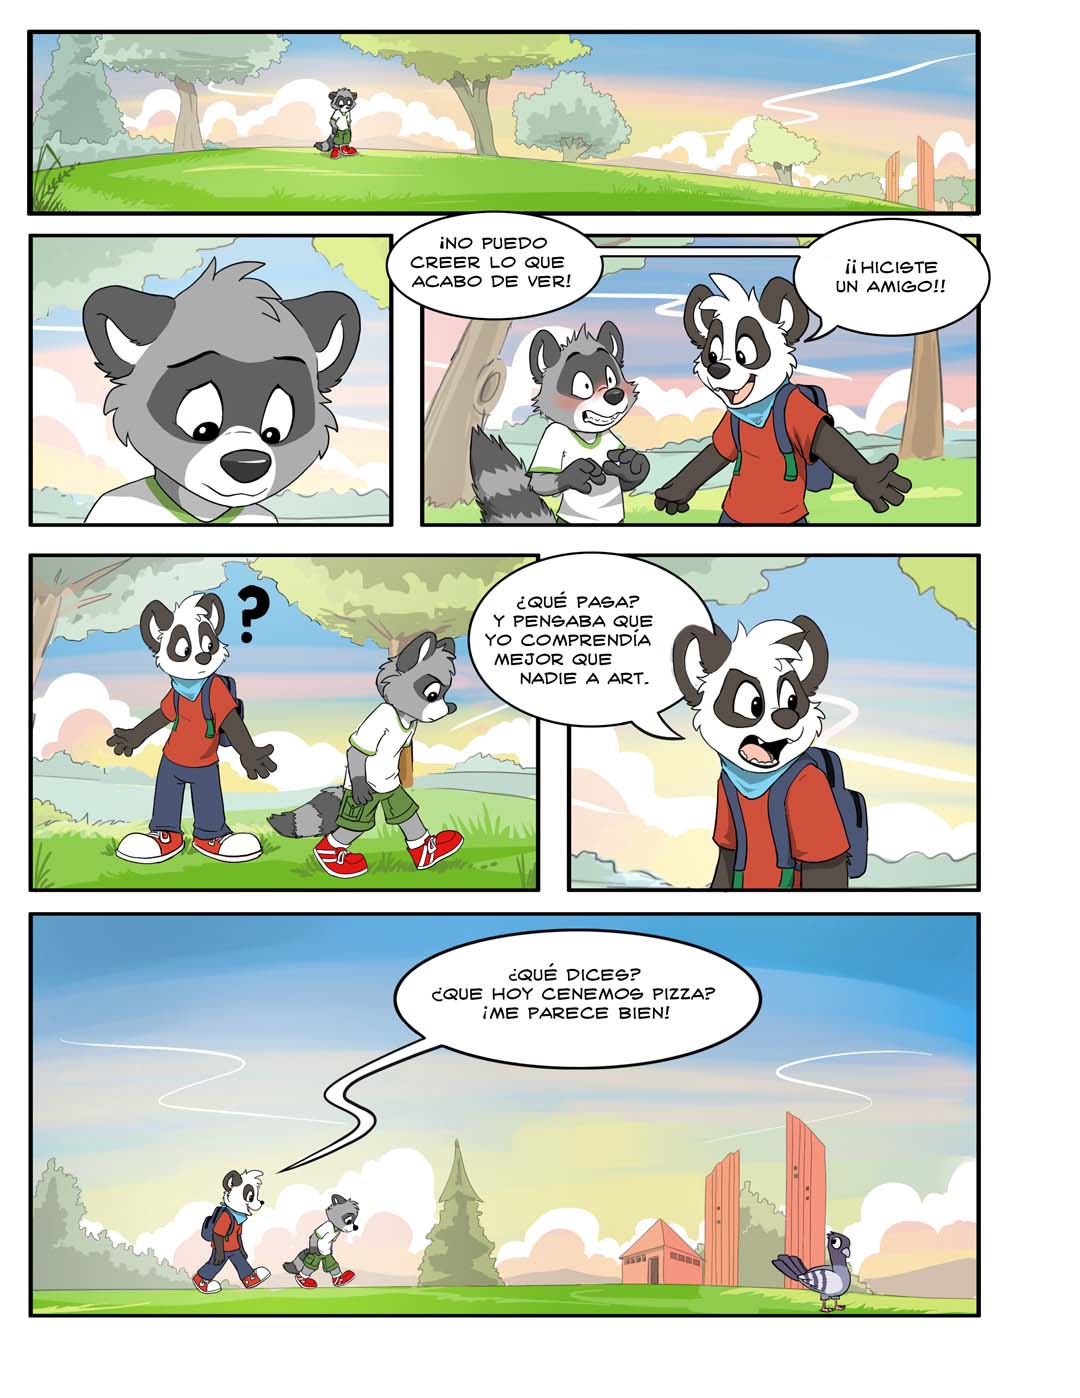 page 18